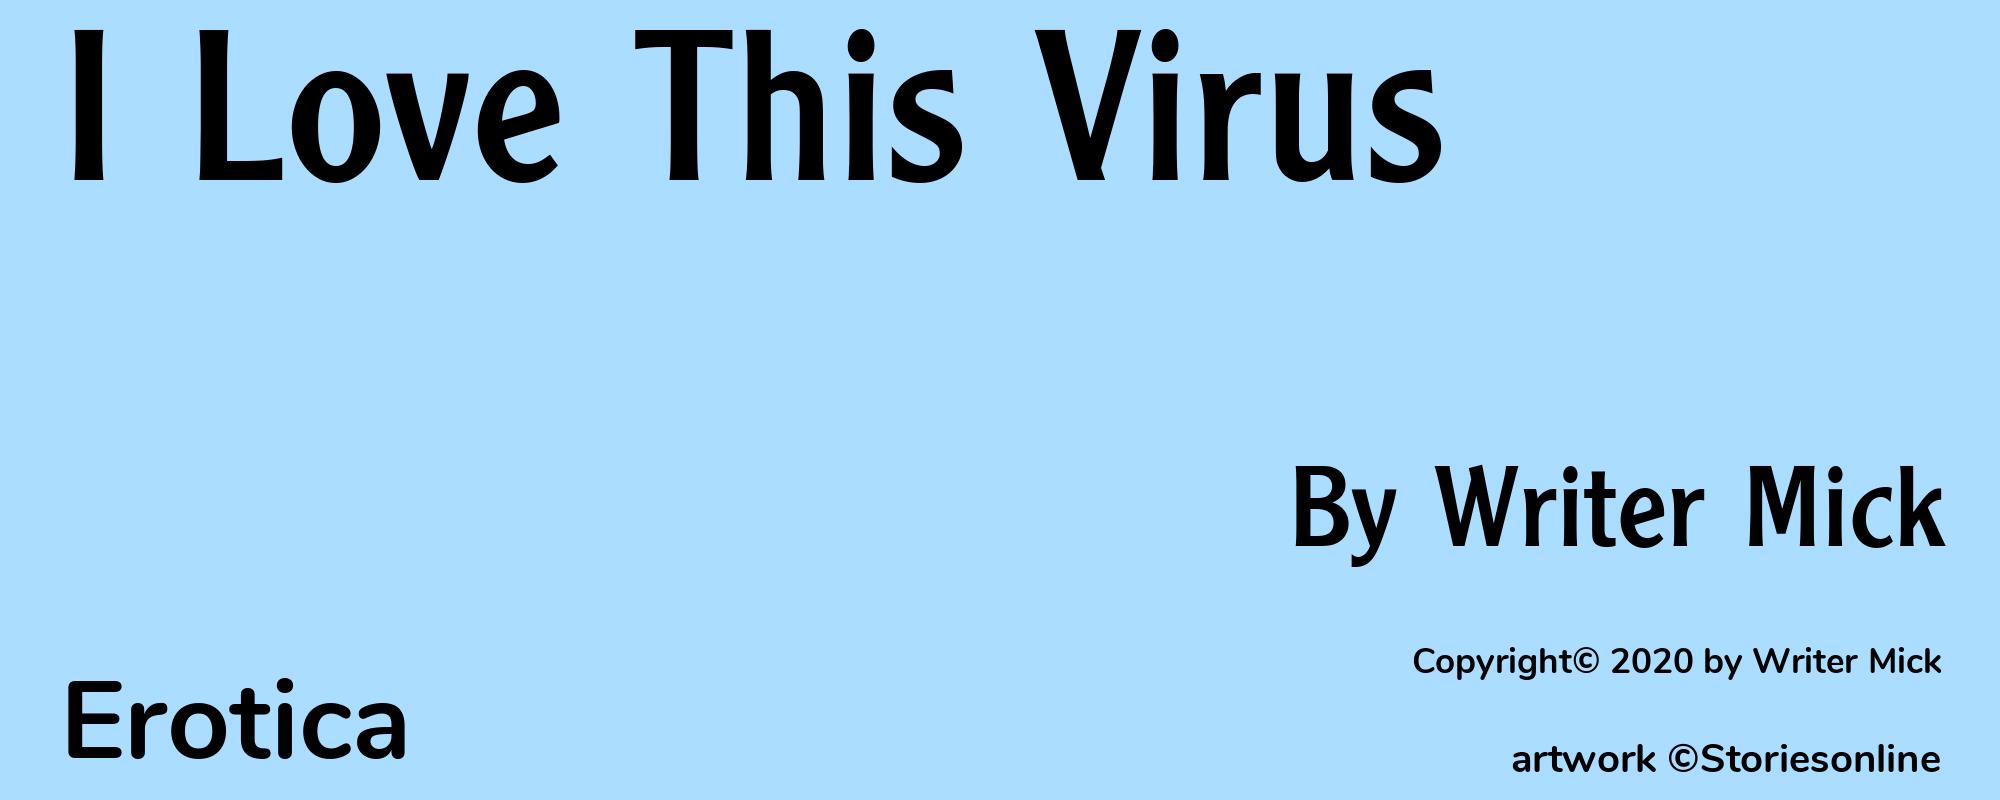 I Love This Virus - Cover